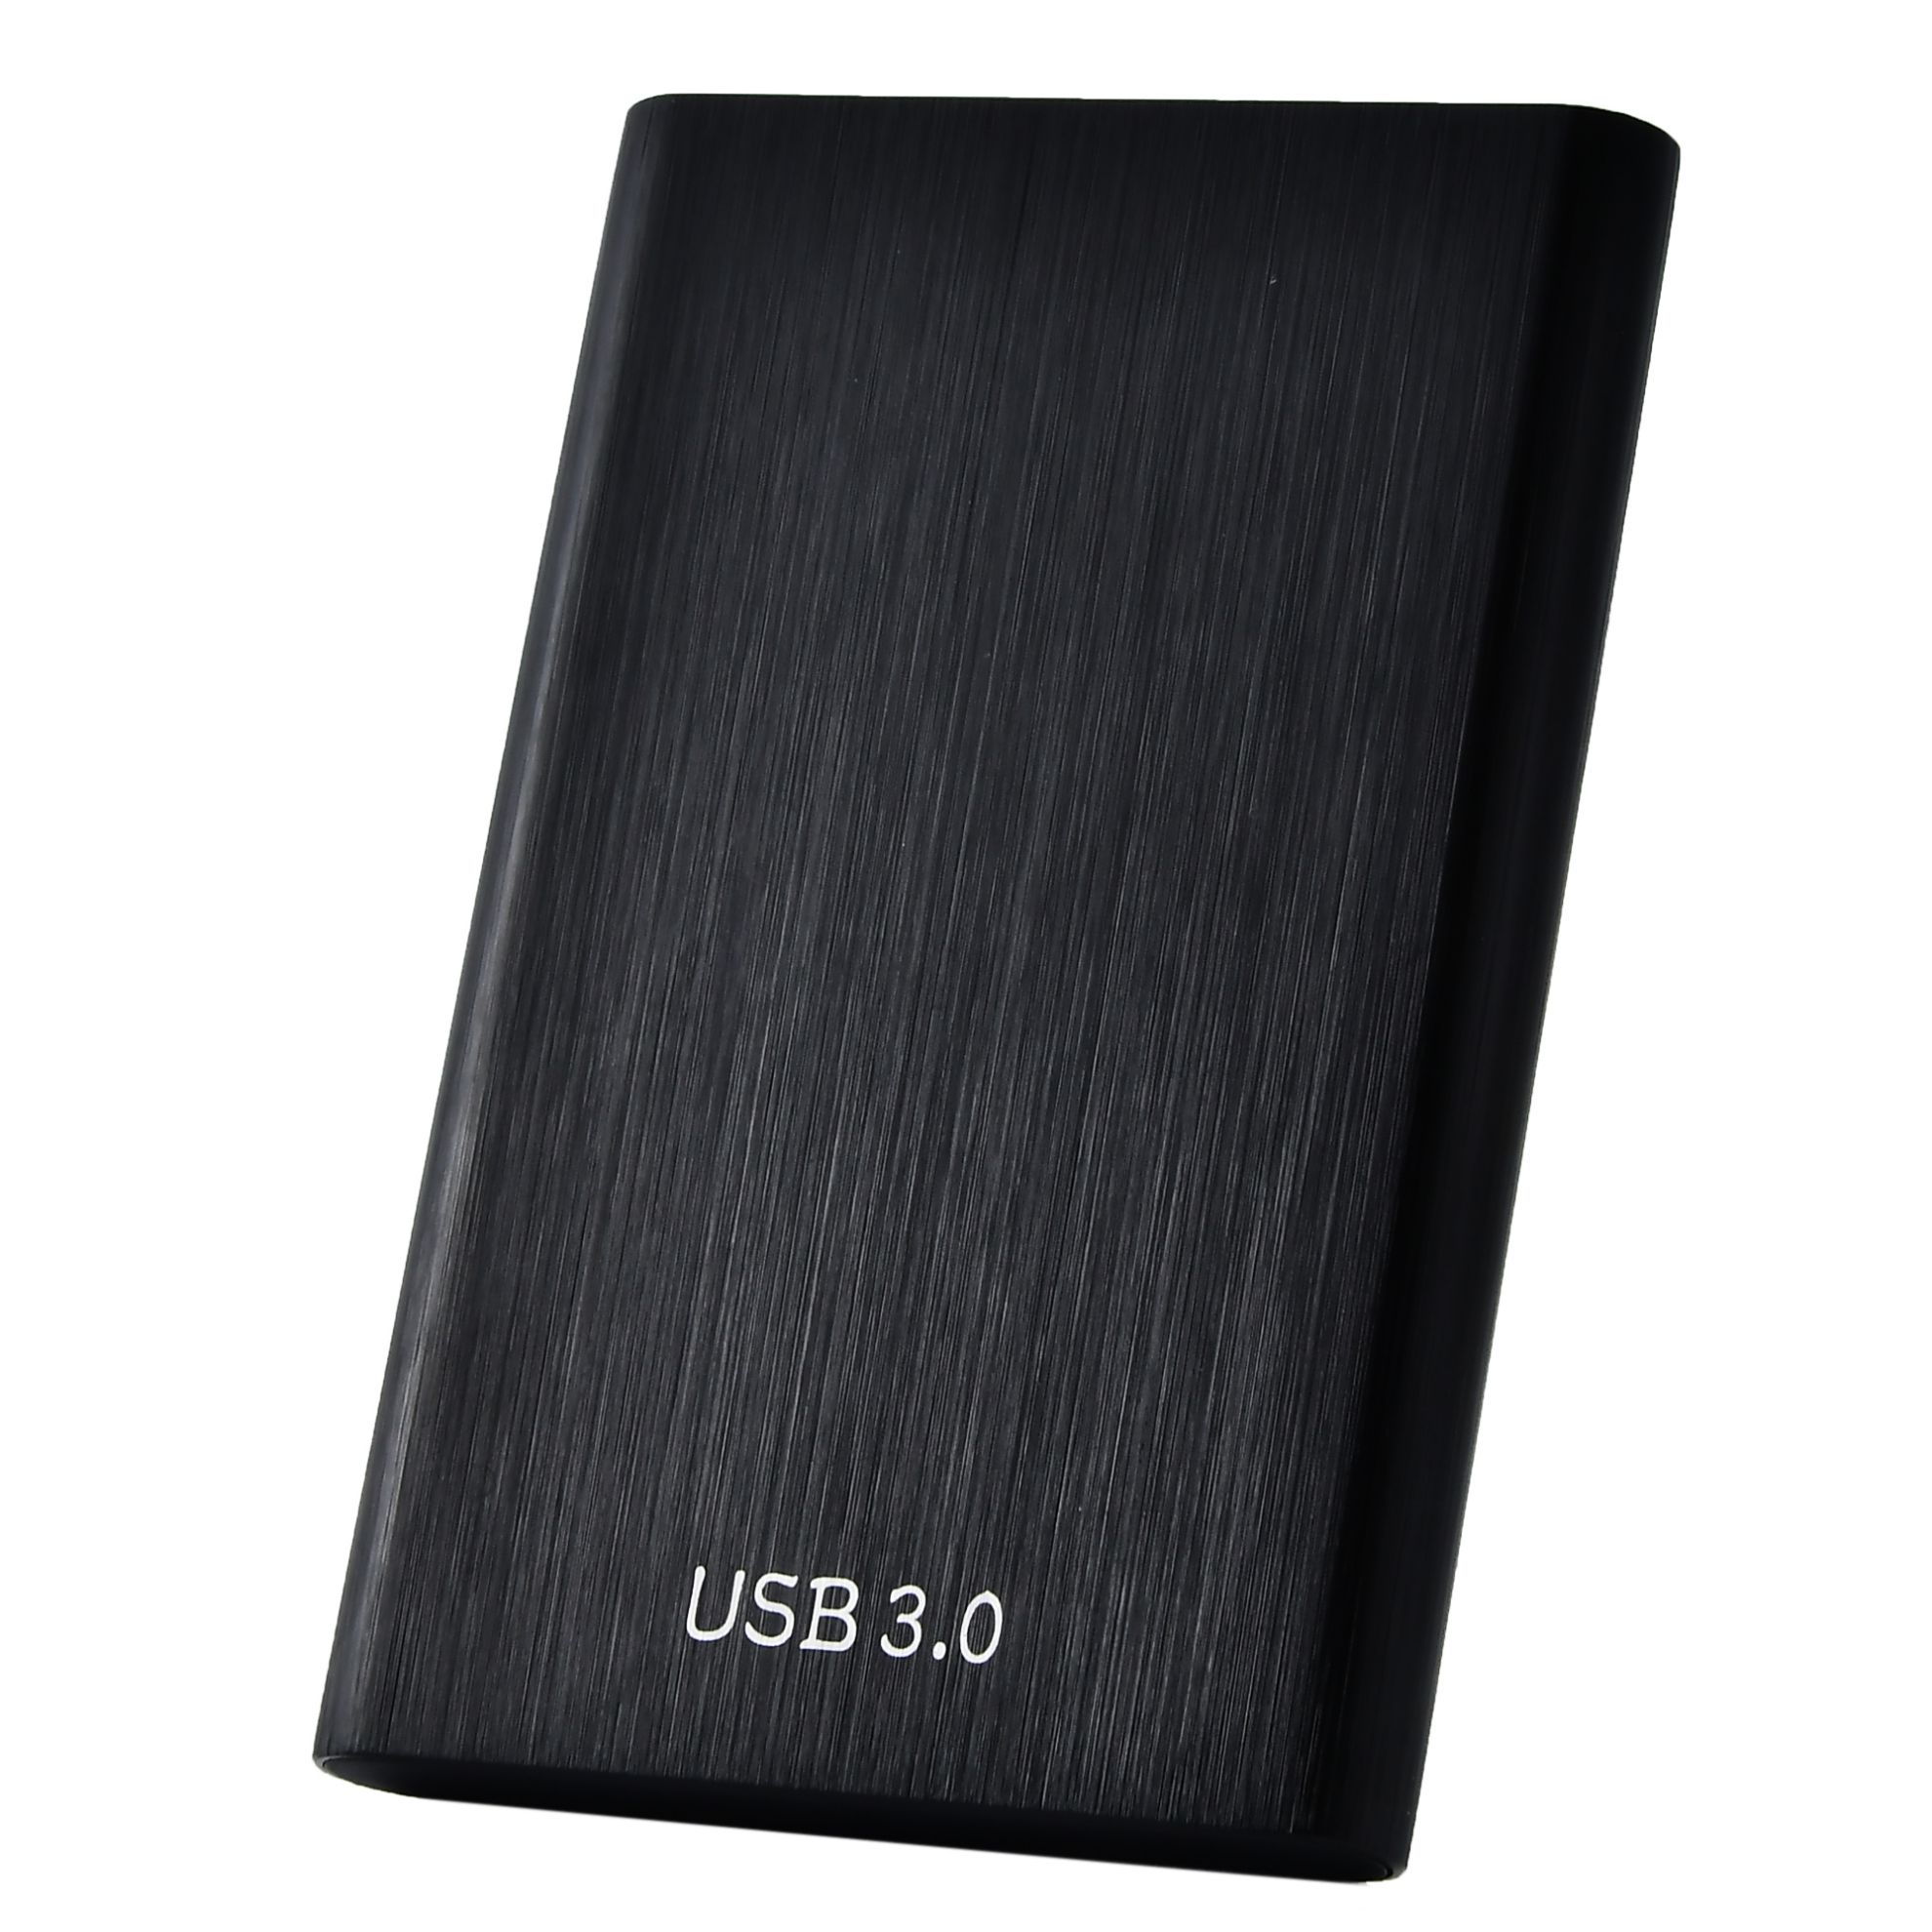 2TB External Hard Drive Portable Hard Drive High Speed USB 3.1 External Solid State Drive for Mac, PC, Laptop